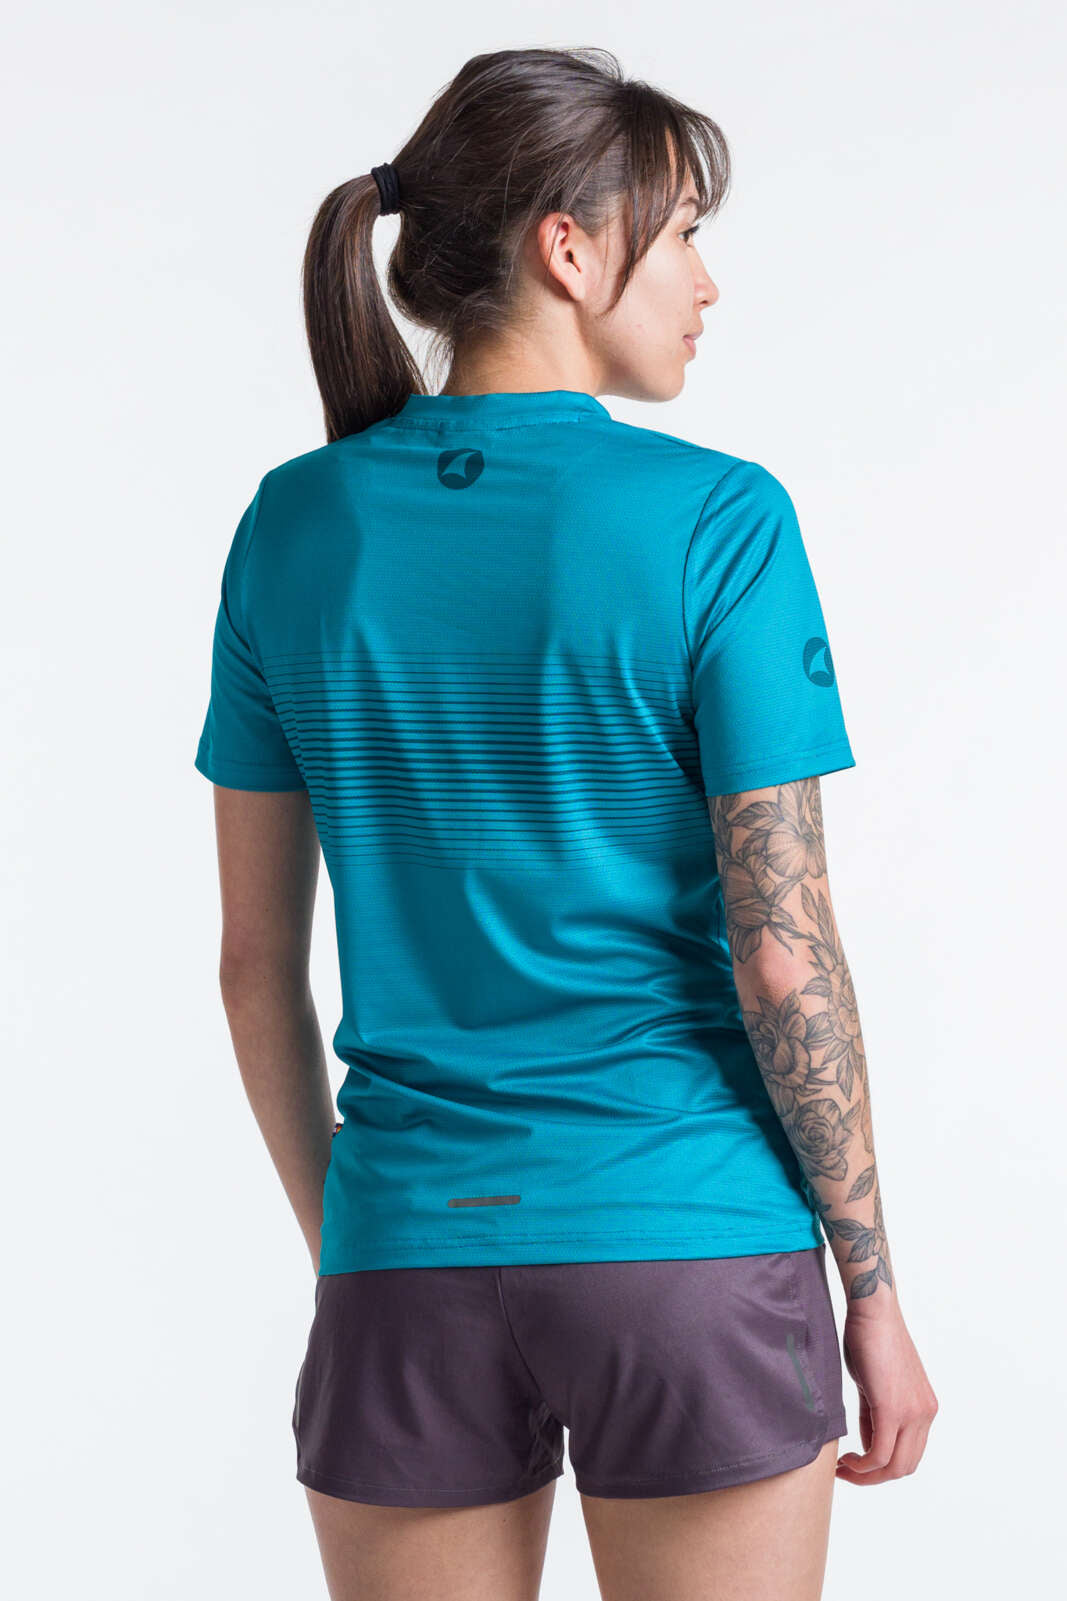 Running Lightweight Pactimo & Shirt Breathable Teal | Women\'s |